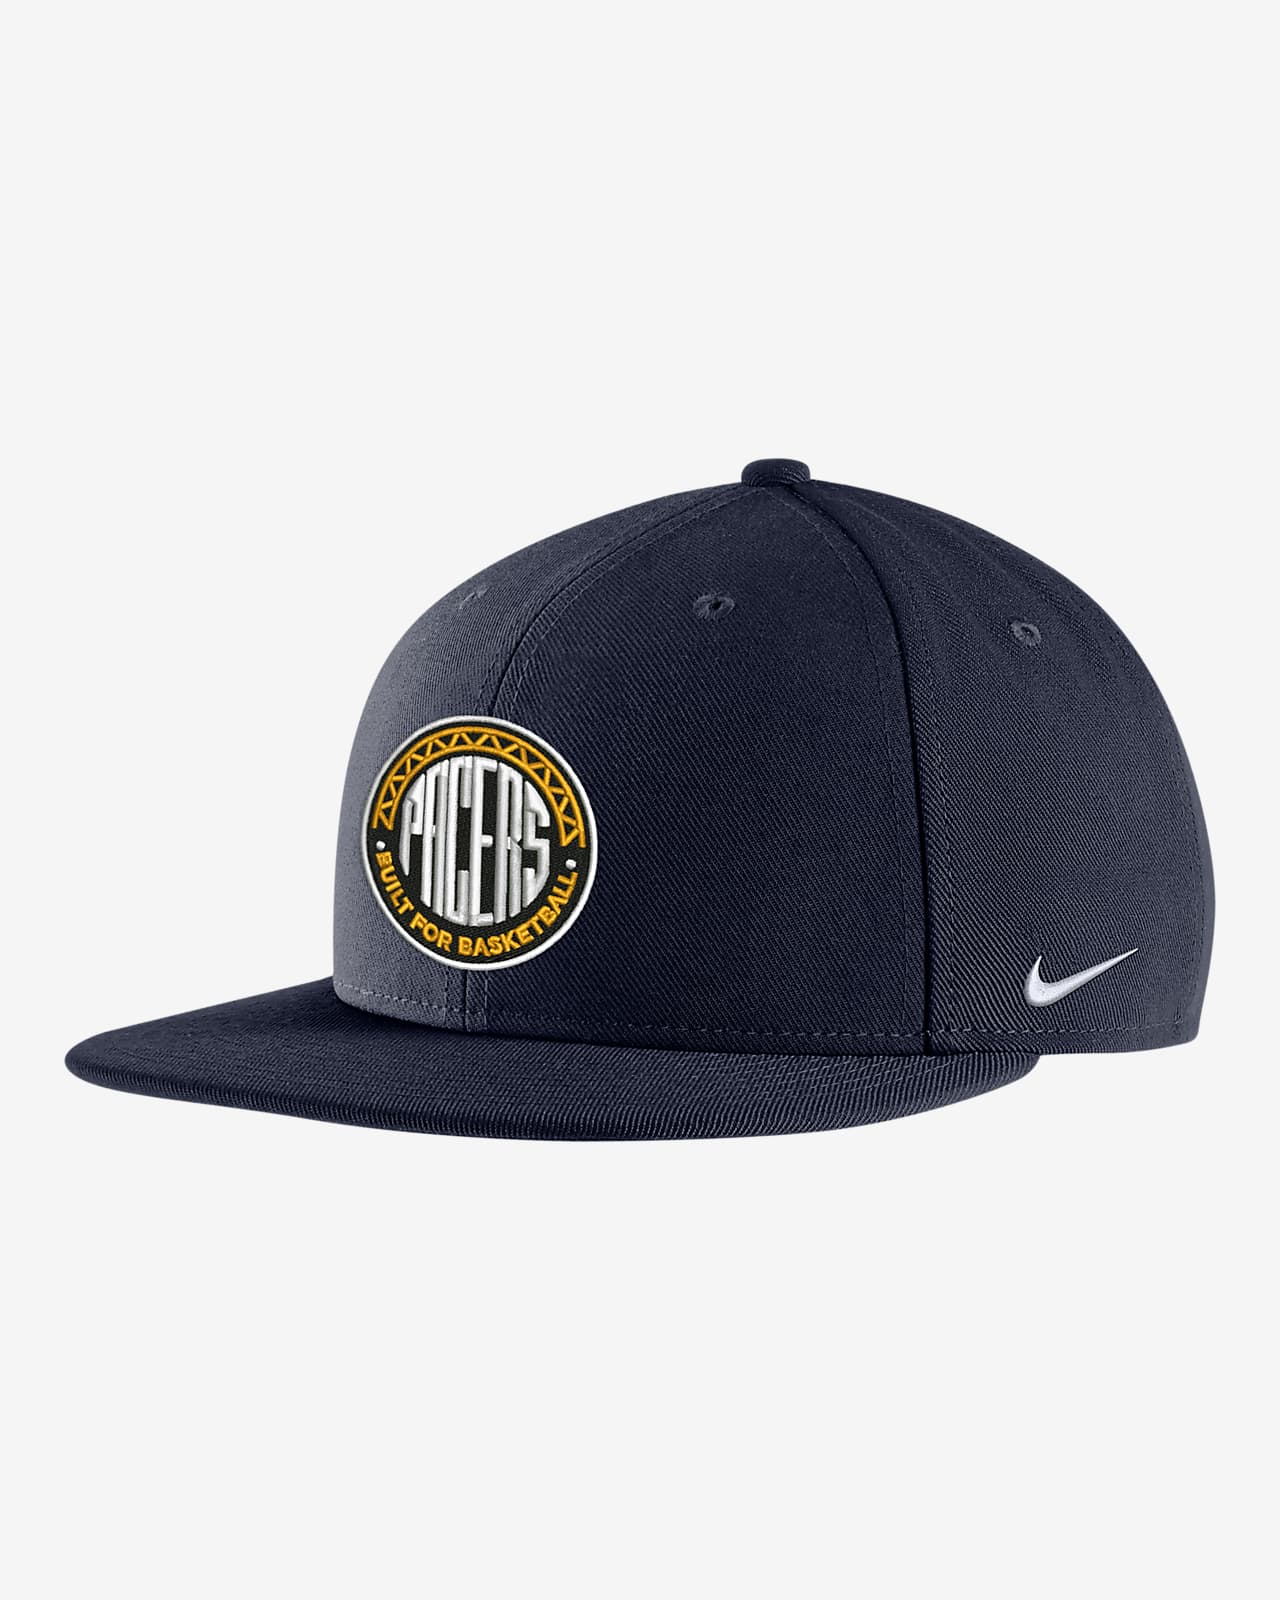 Indiana Pacers City Edition Nike NBA Snapback Hat